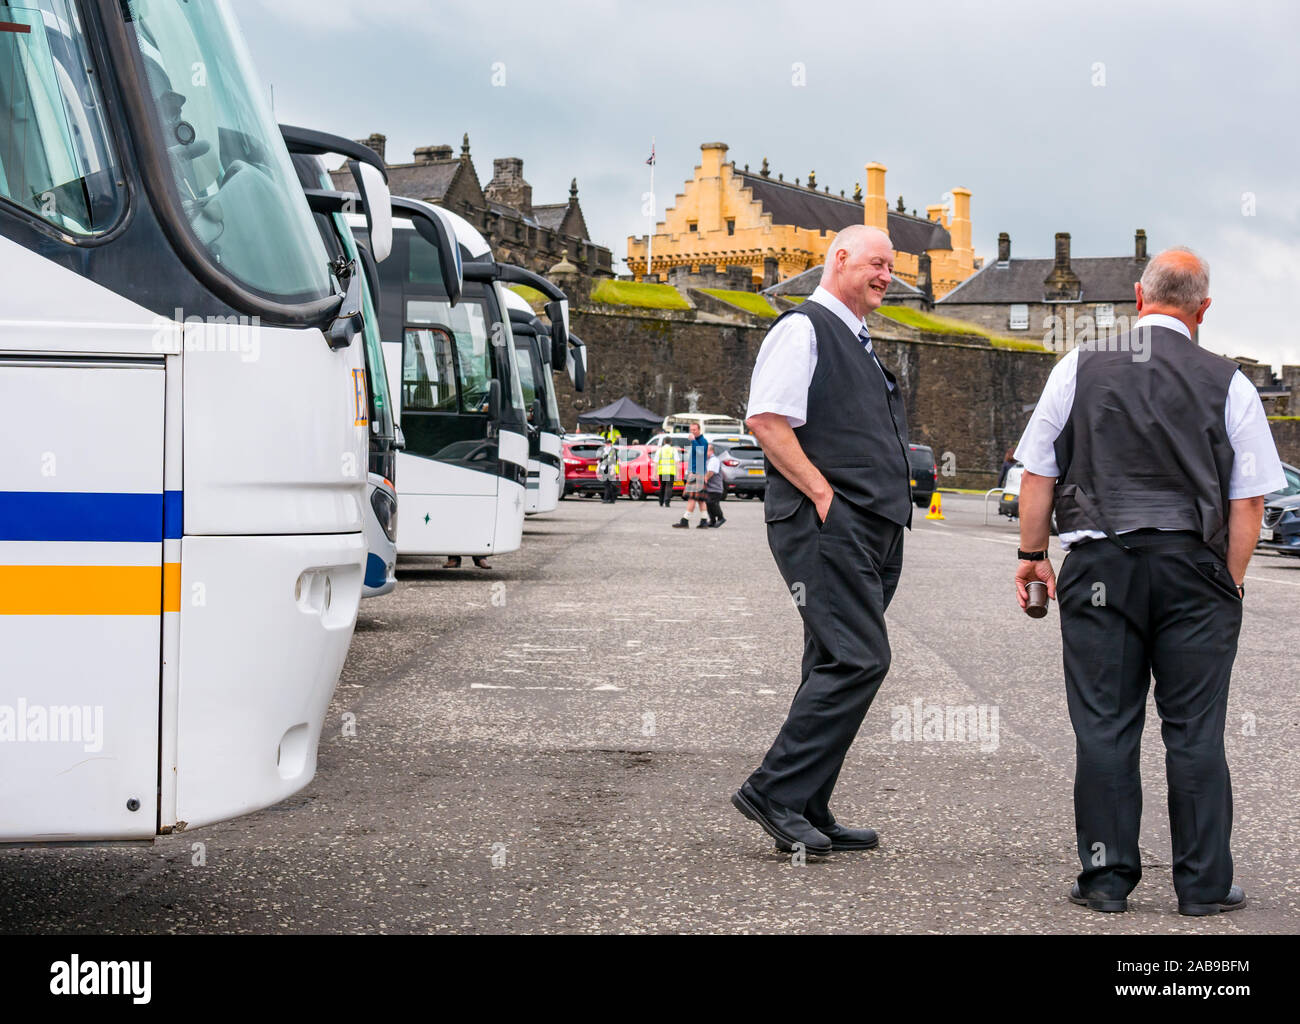 Coach and bus park with waiting bus drivers, castle esplanade, Stirling Castle, Scotland, UK Stock Photo